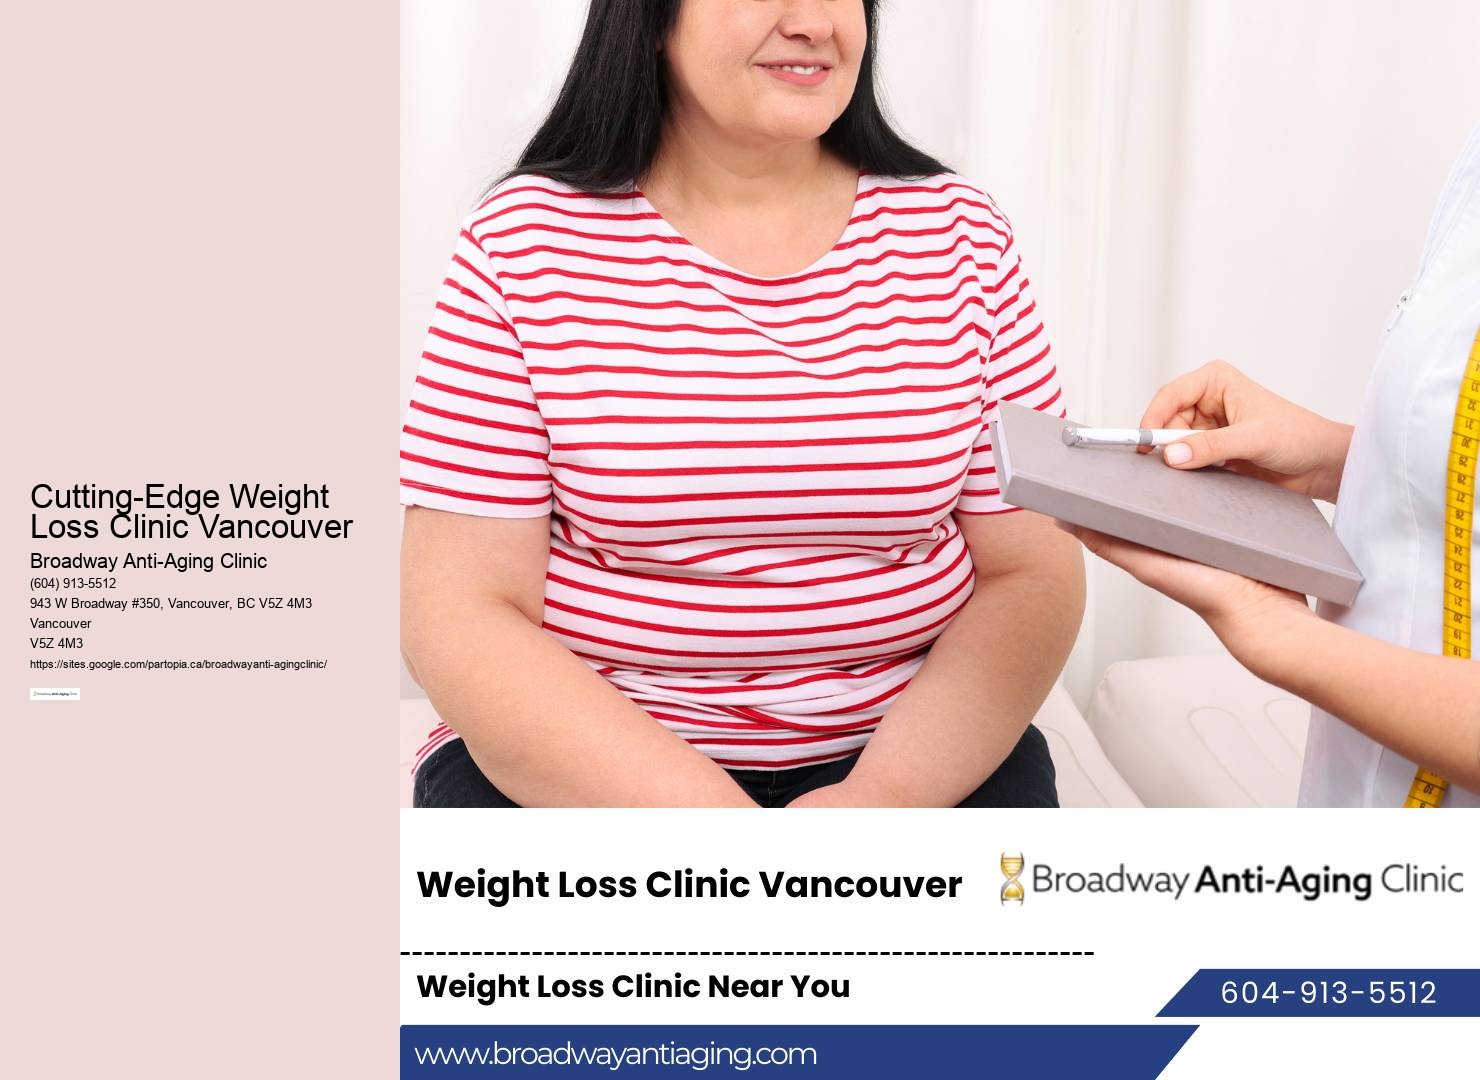 Revolution medical clinic Vancouver nearby